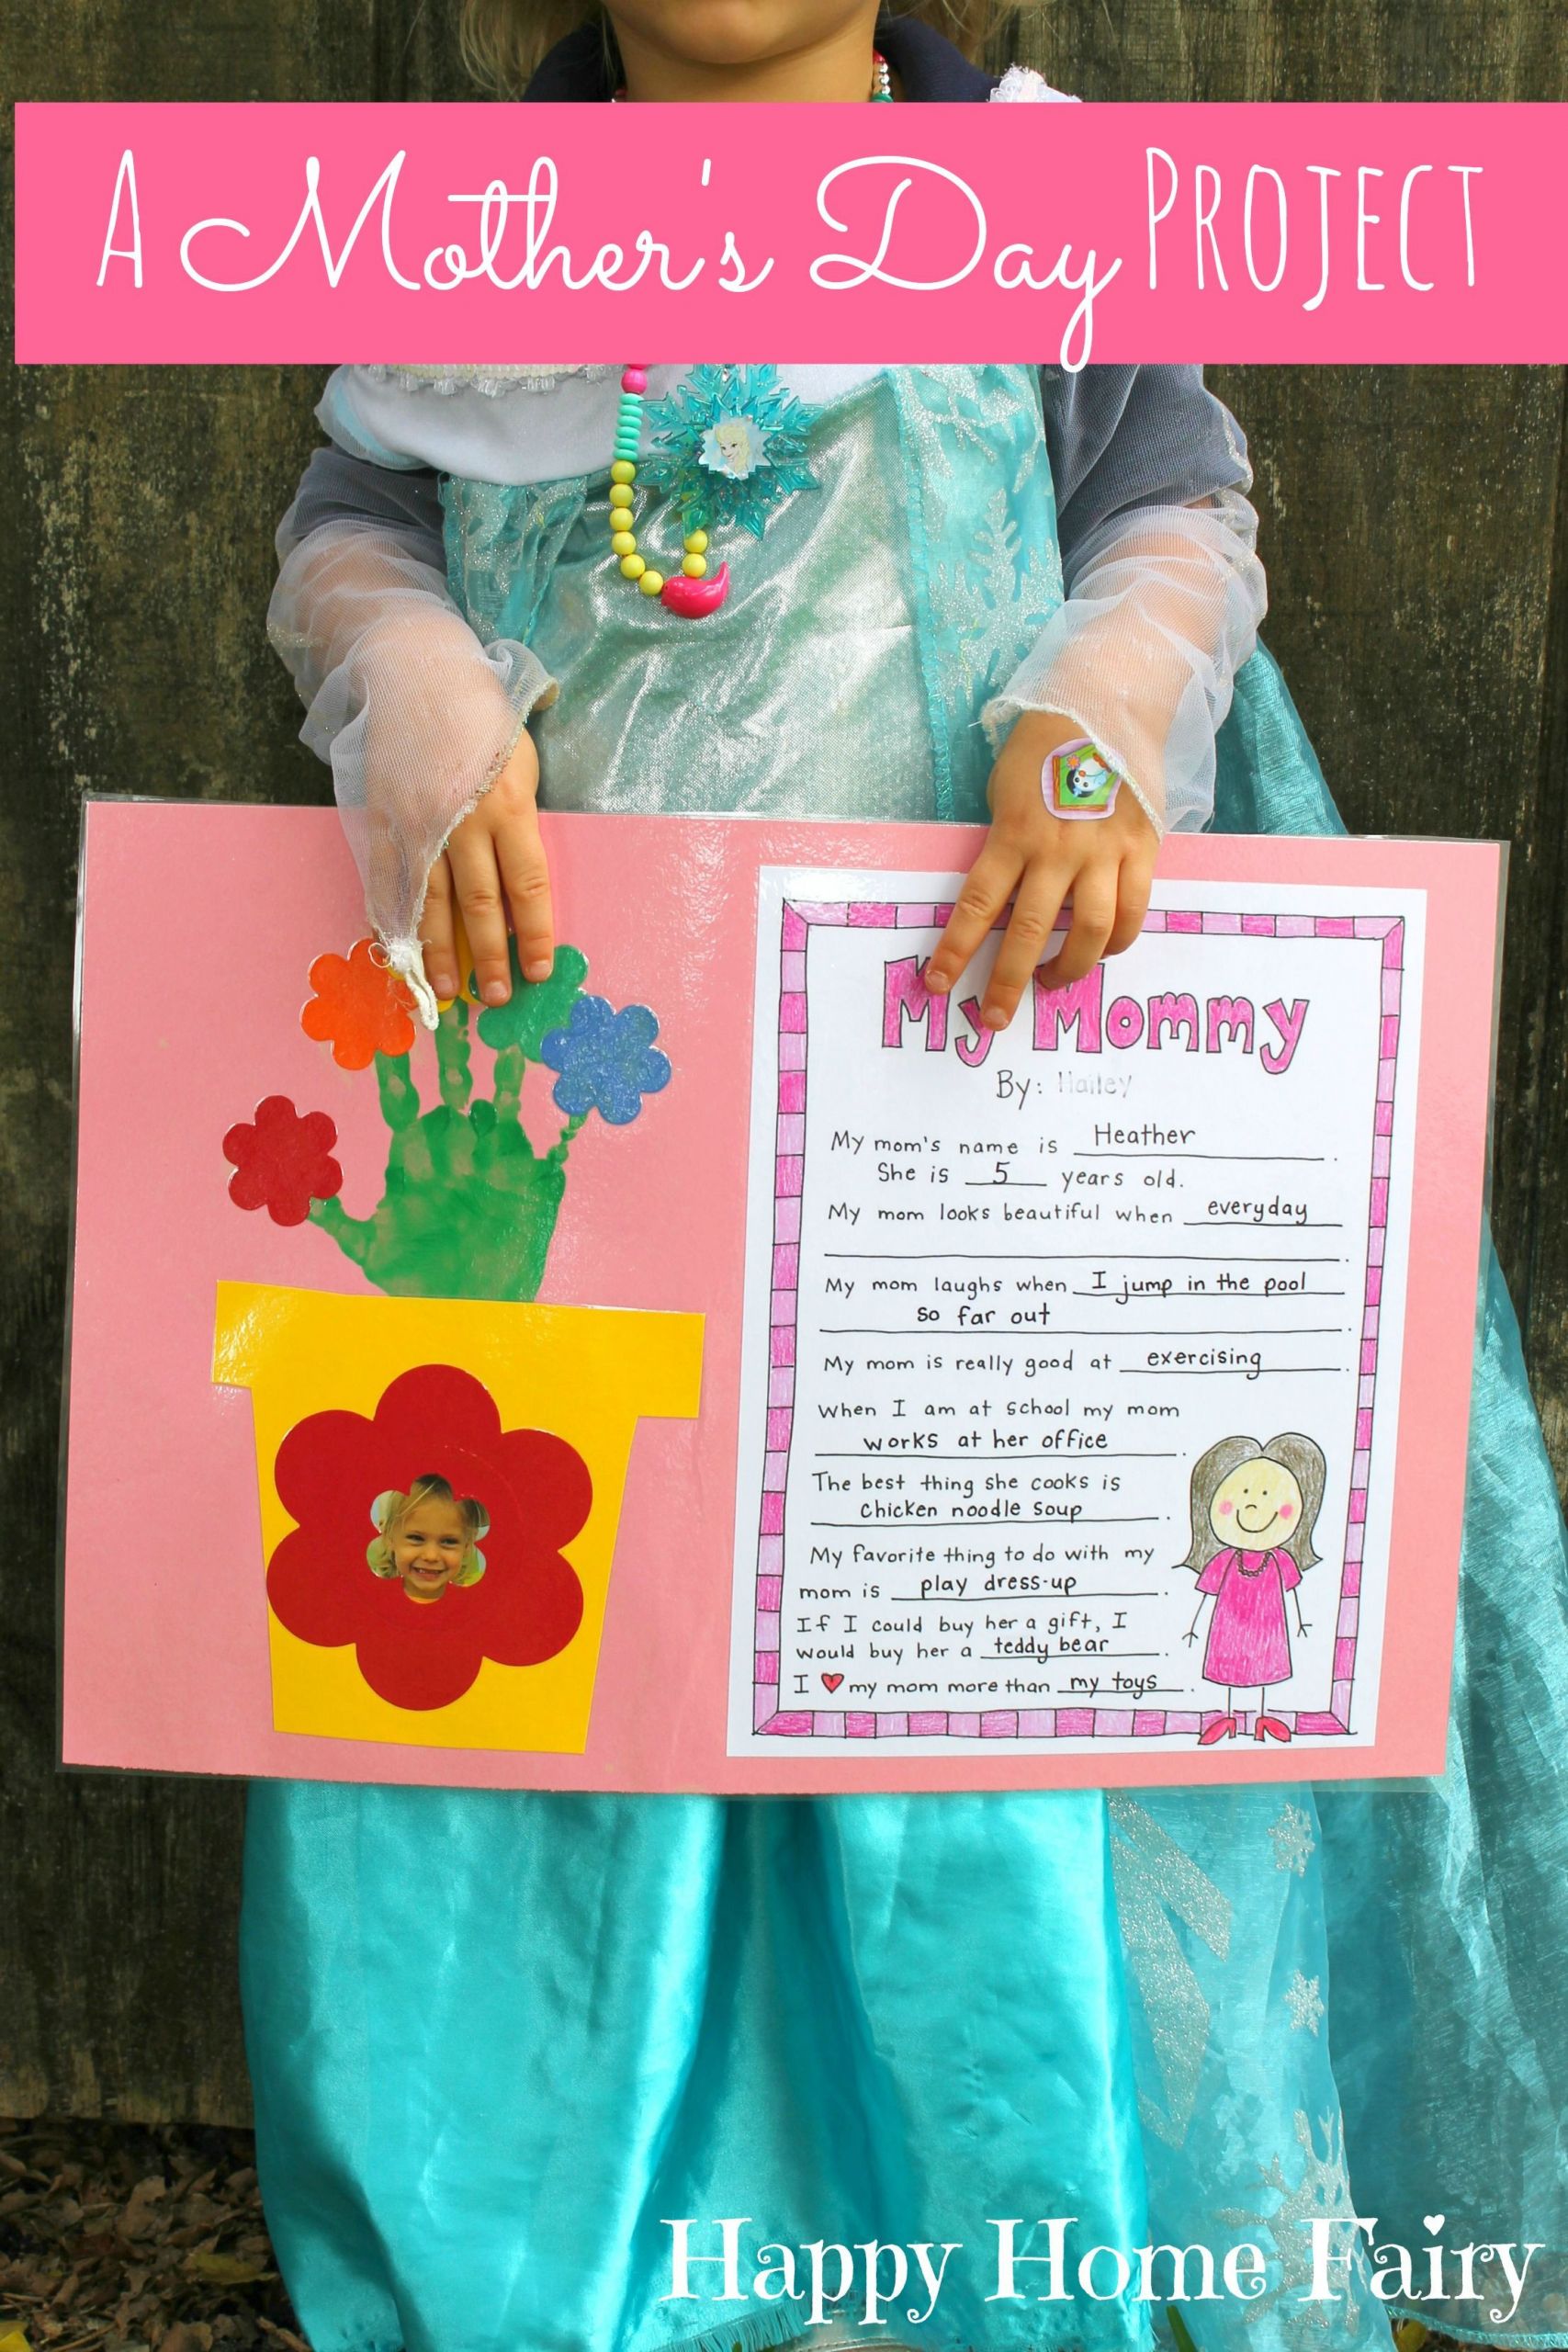 Free Printable Mothers Day Crafts
 A Mother s Day Project FREE Printable